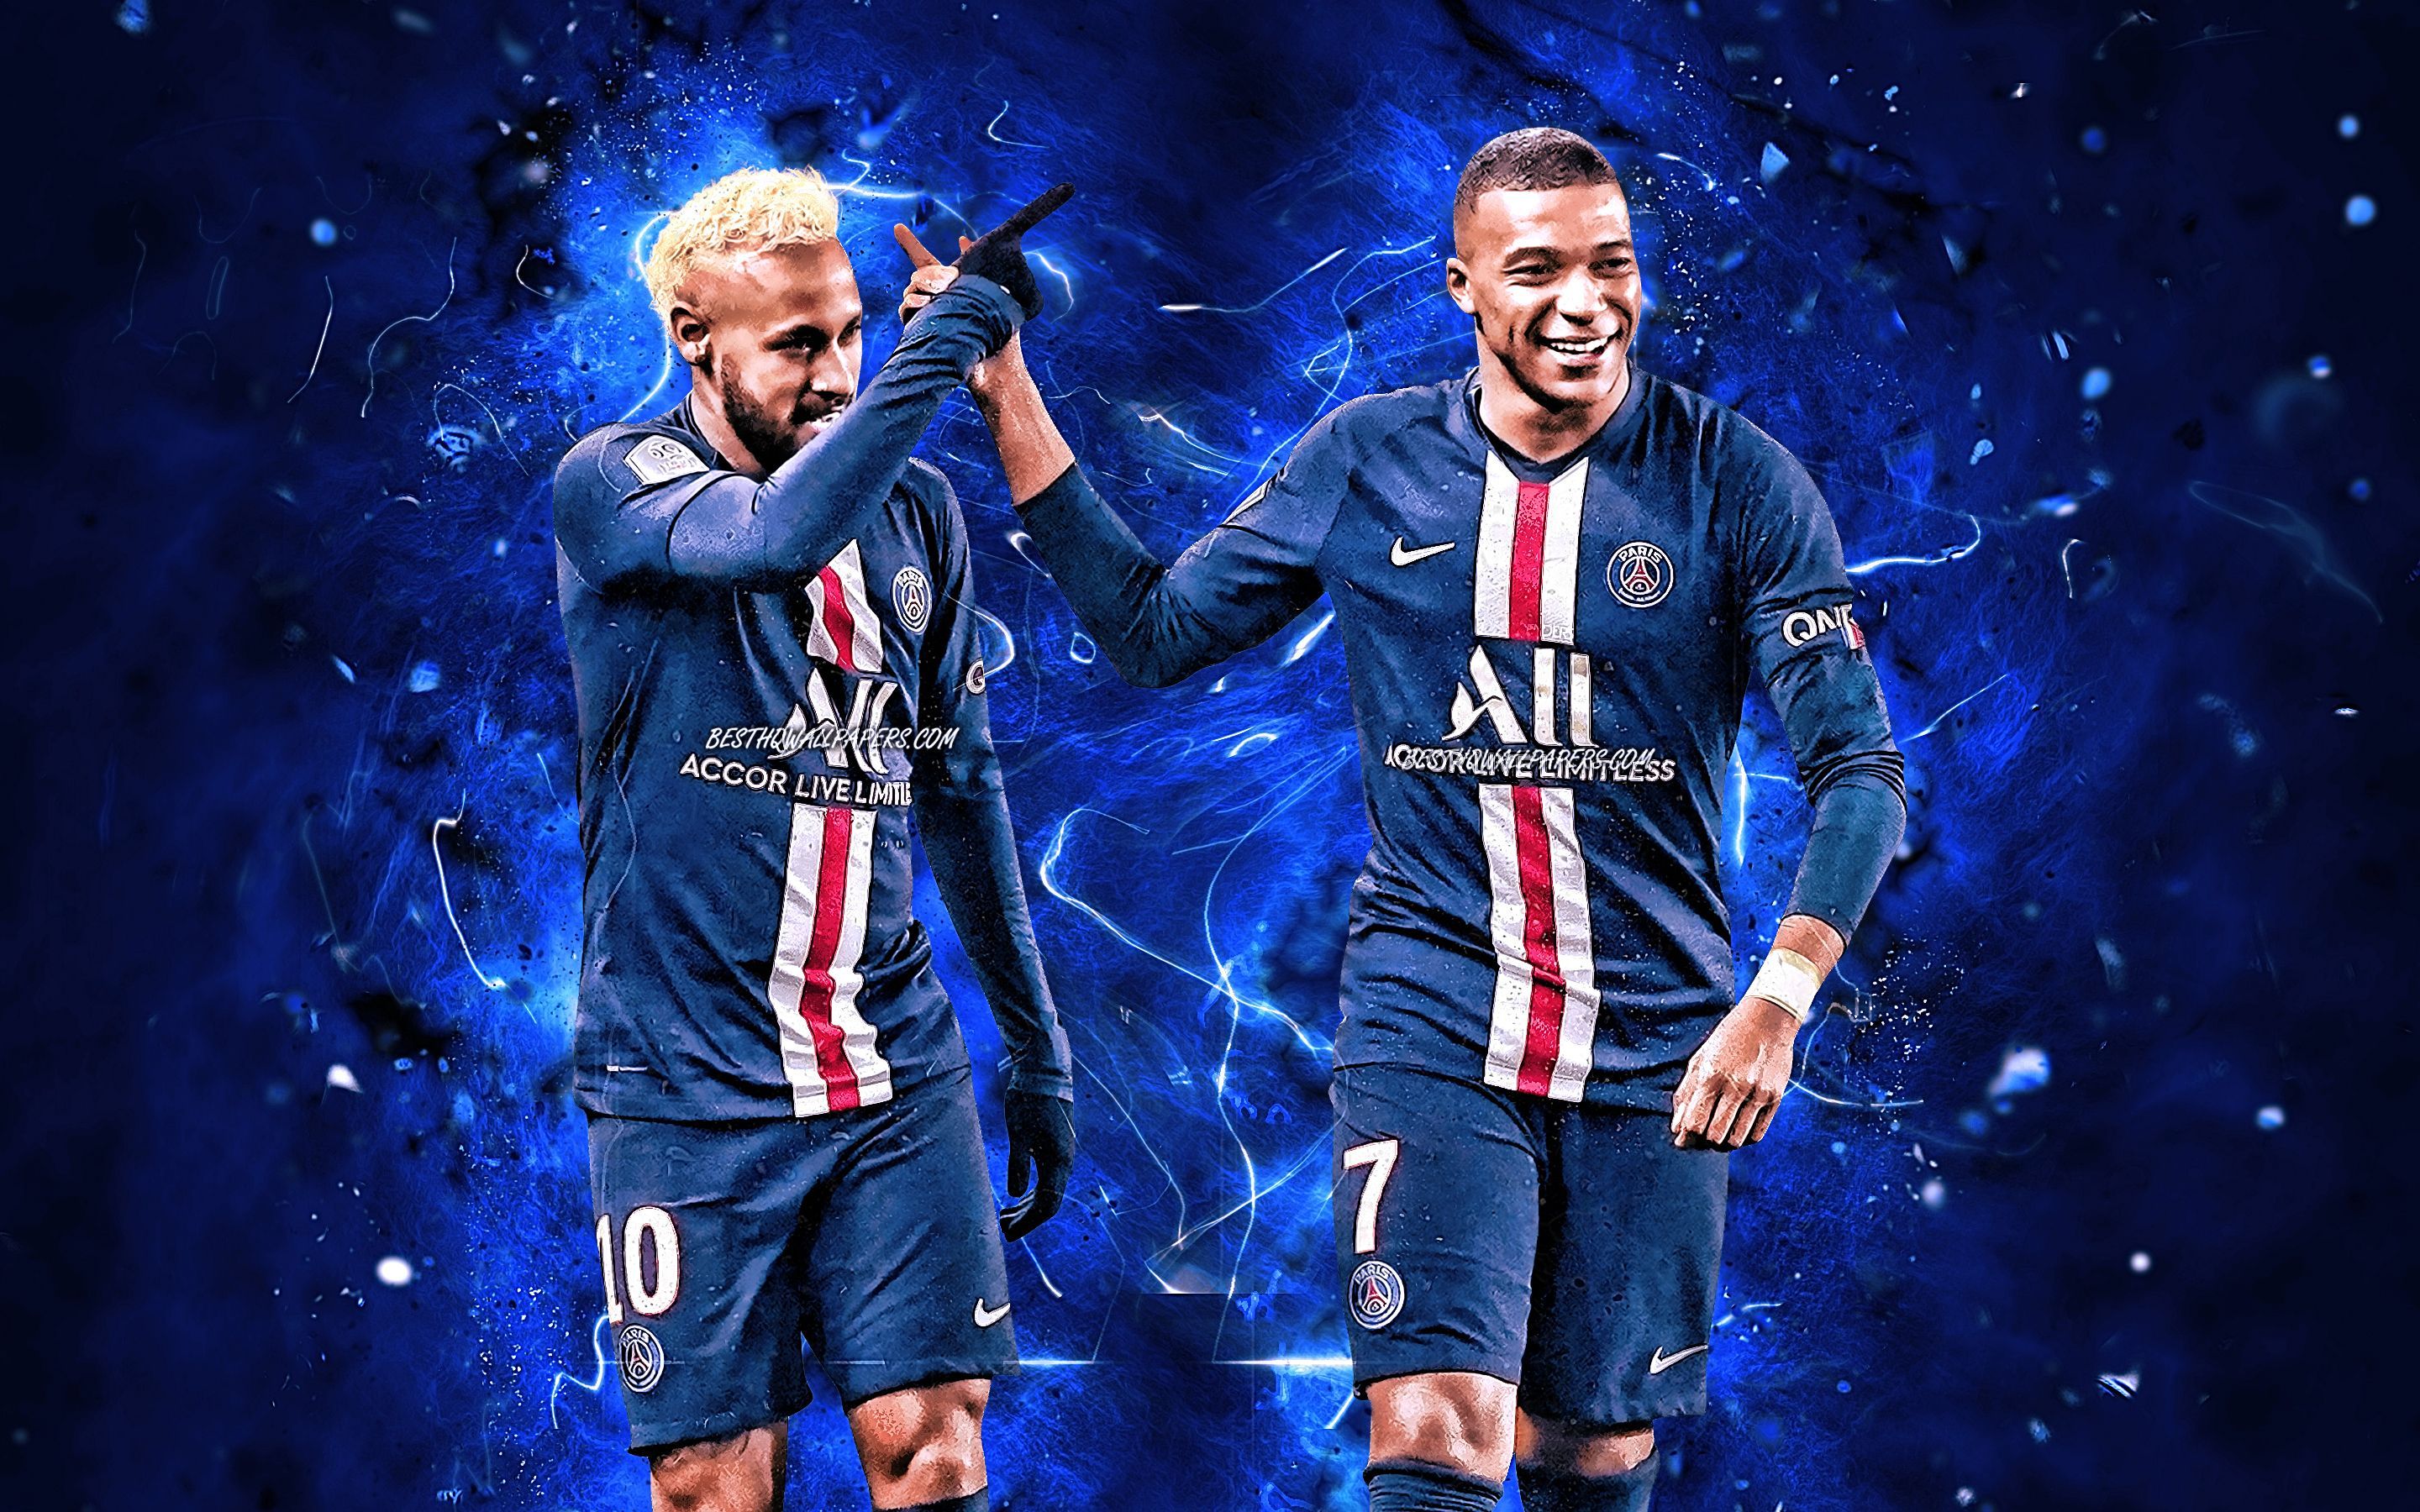 Neymar and Mbappe Wallpaper Free Neymar and Mbappe Background